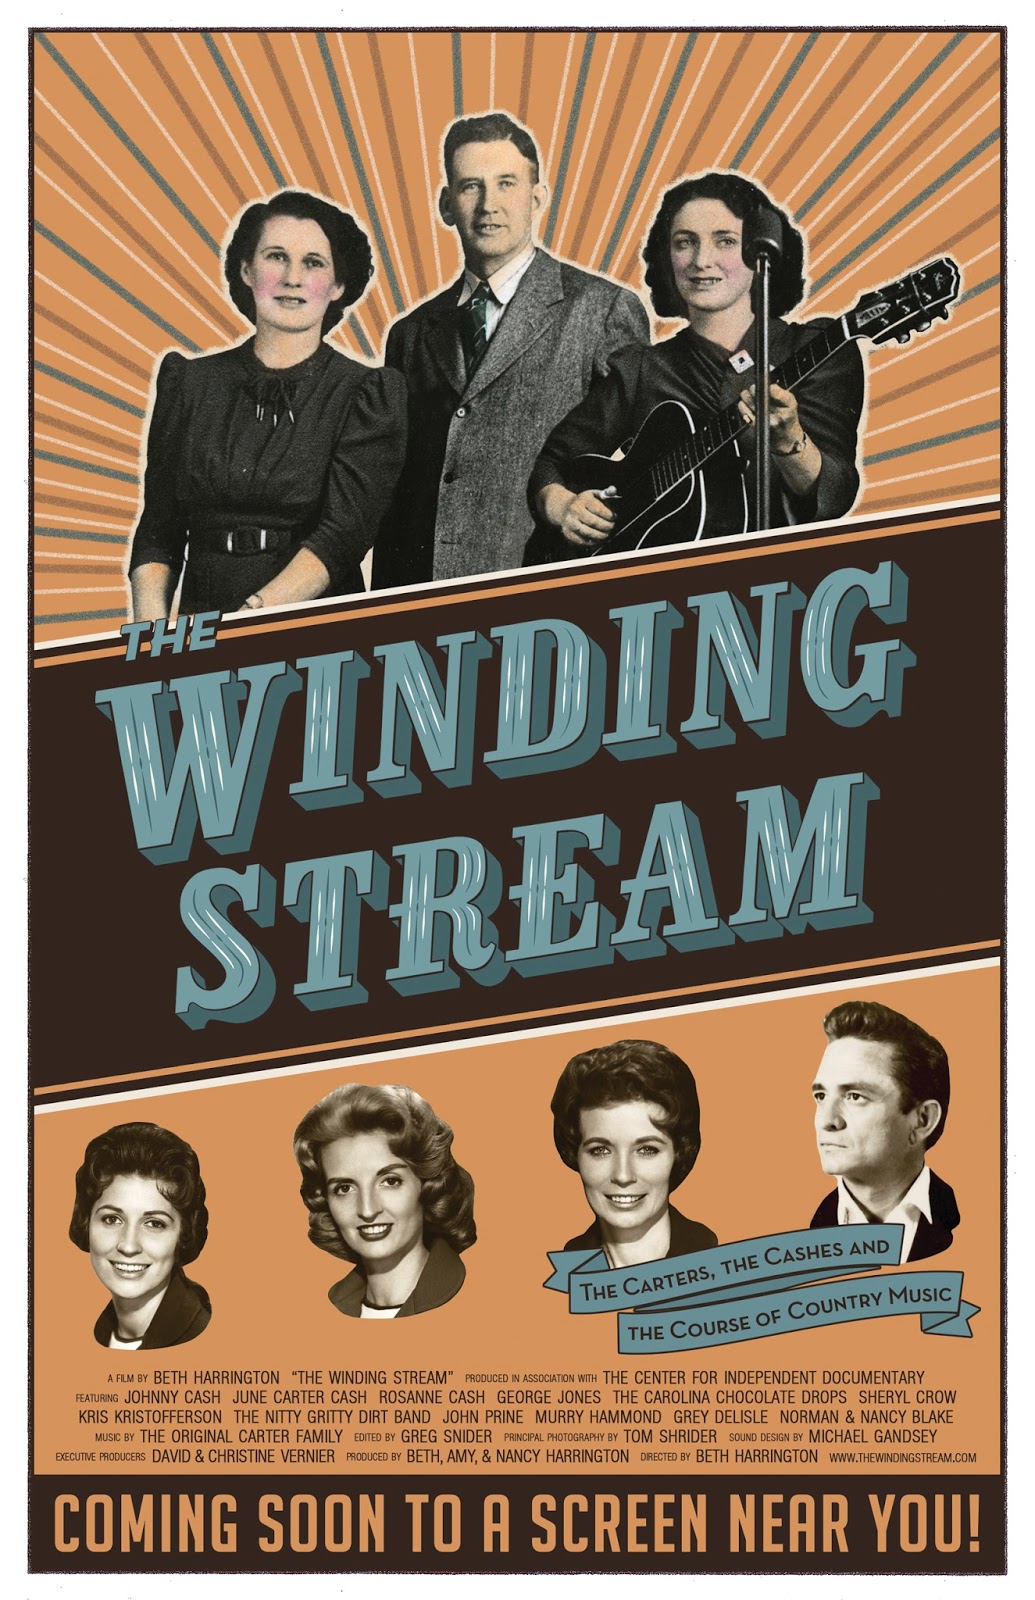 The Cleveland Movie Blog: The Winding Stream: The Carters ...